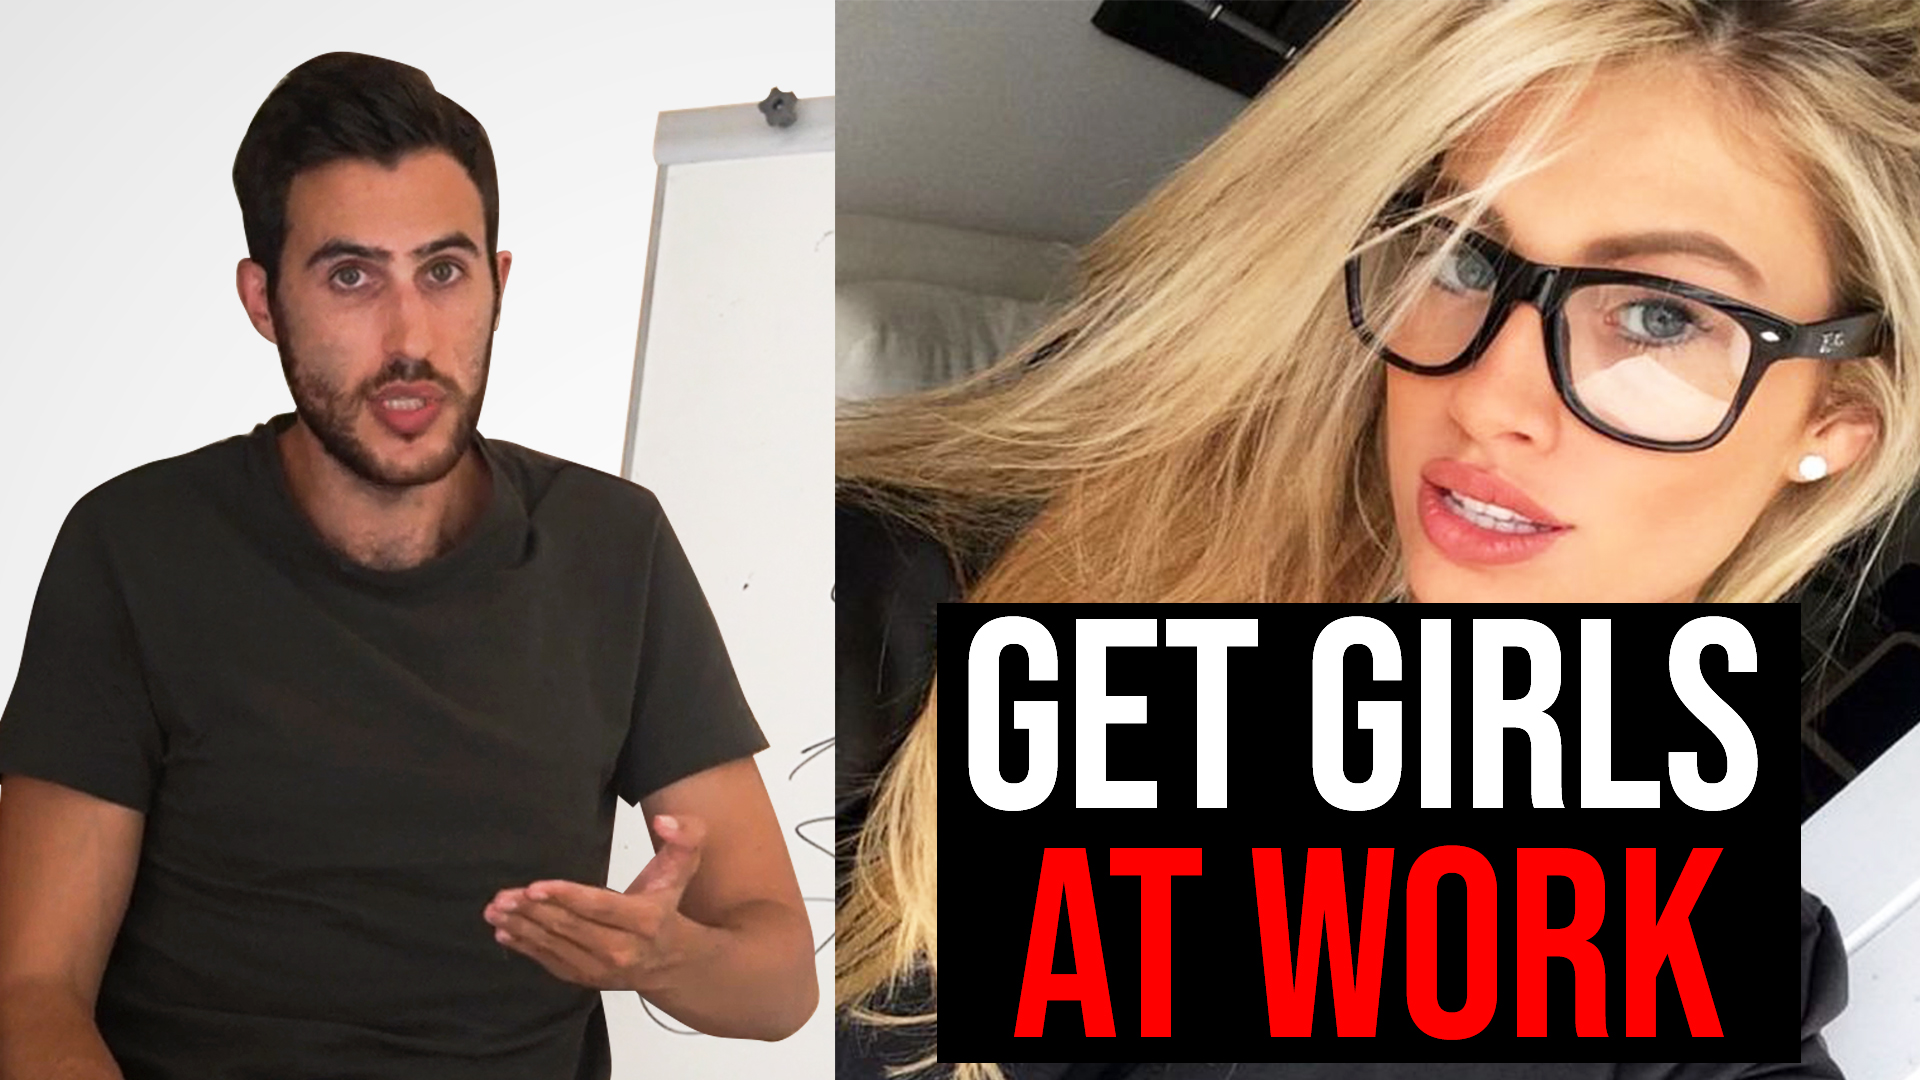 How To Get Girls At Work (flirting tips to use on co-workers)